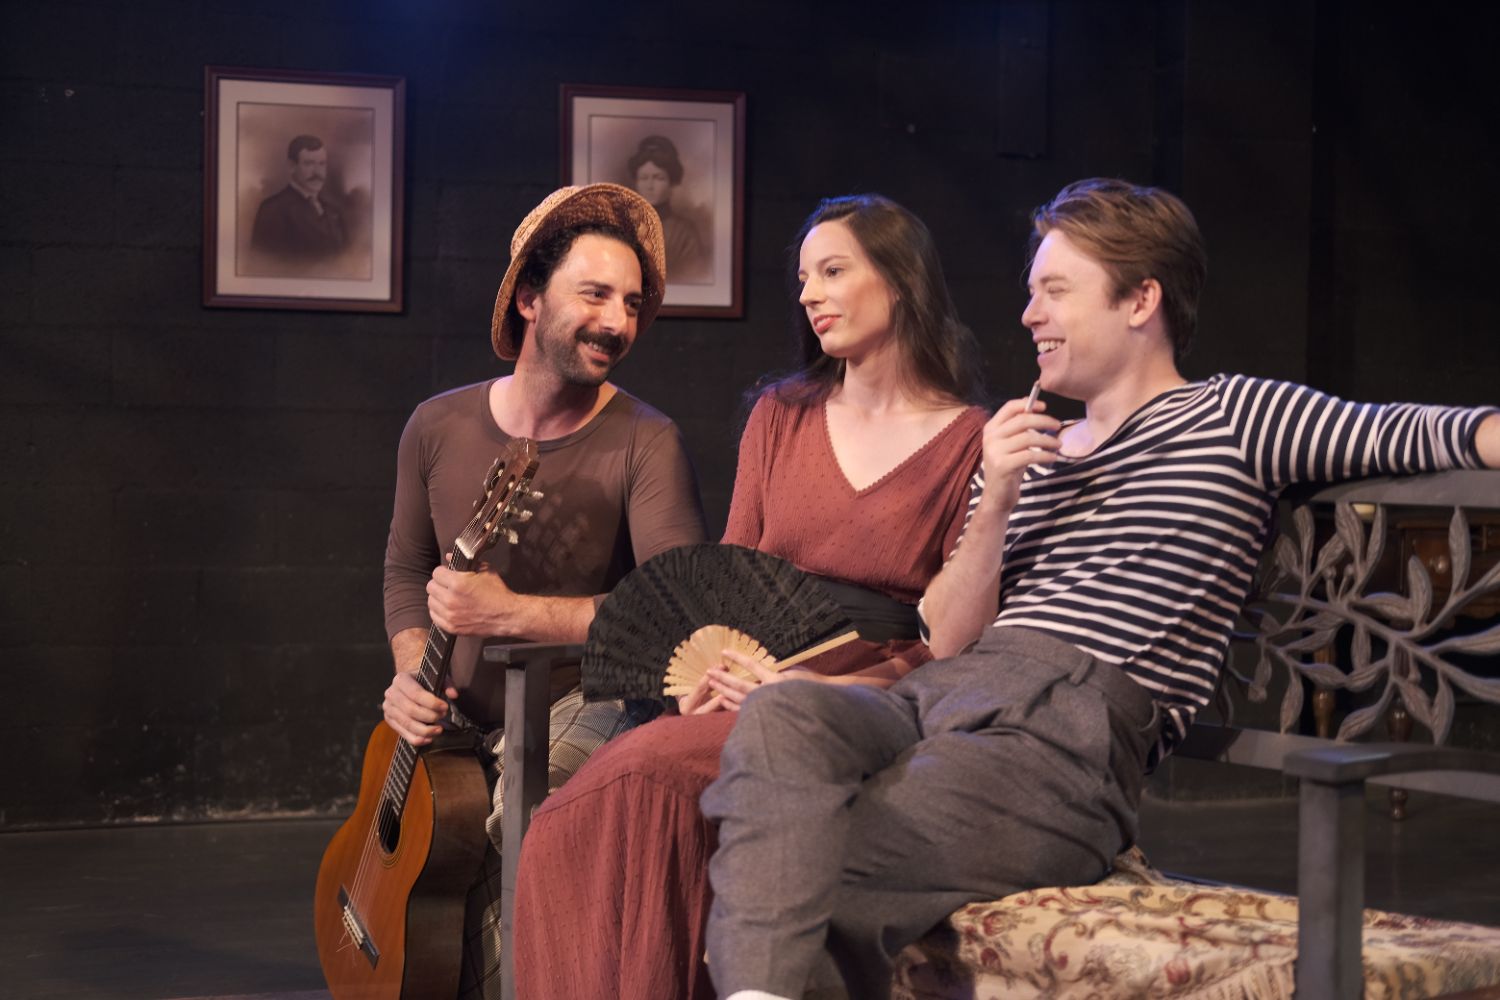 PHOTO: Jack Serra | The South Pasadenan | Ben Michaels, Lauren Vogel, and Nick Apostolina in The Cherry Orchard on stage at South Pasadena Theatre Workshop